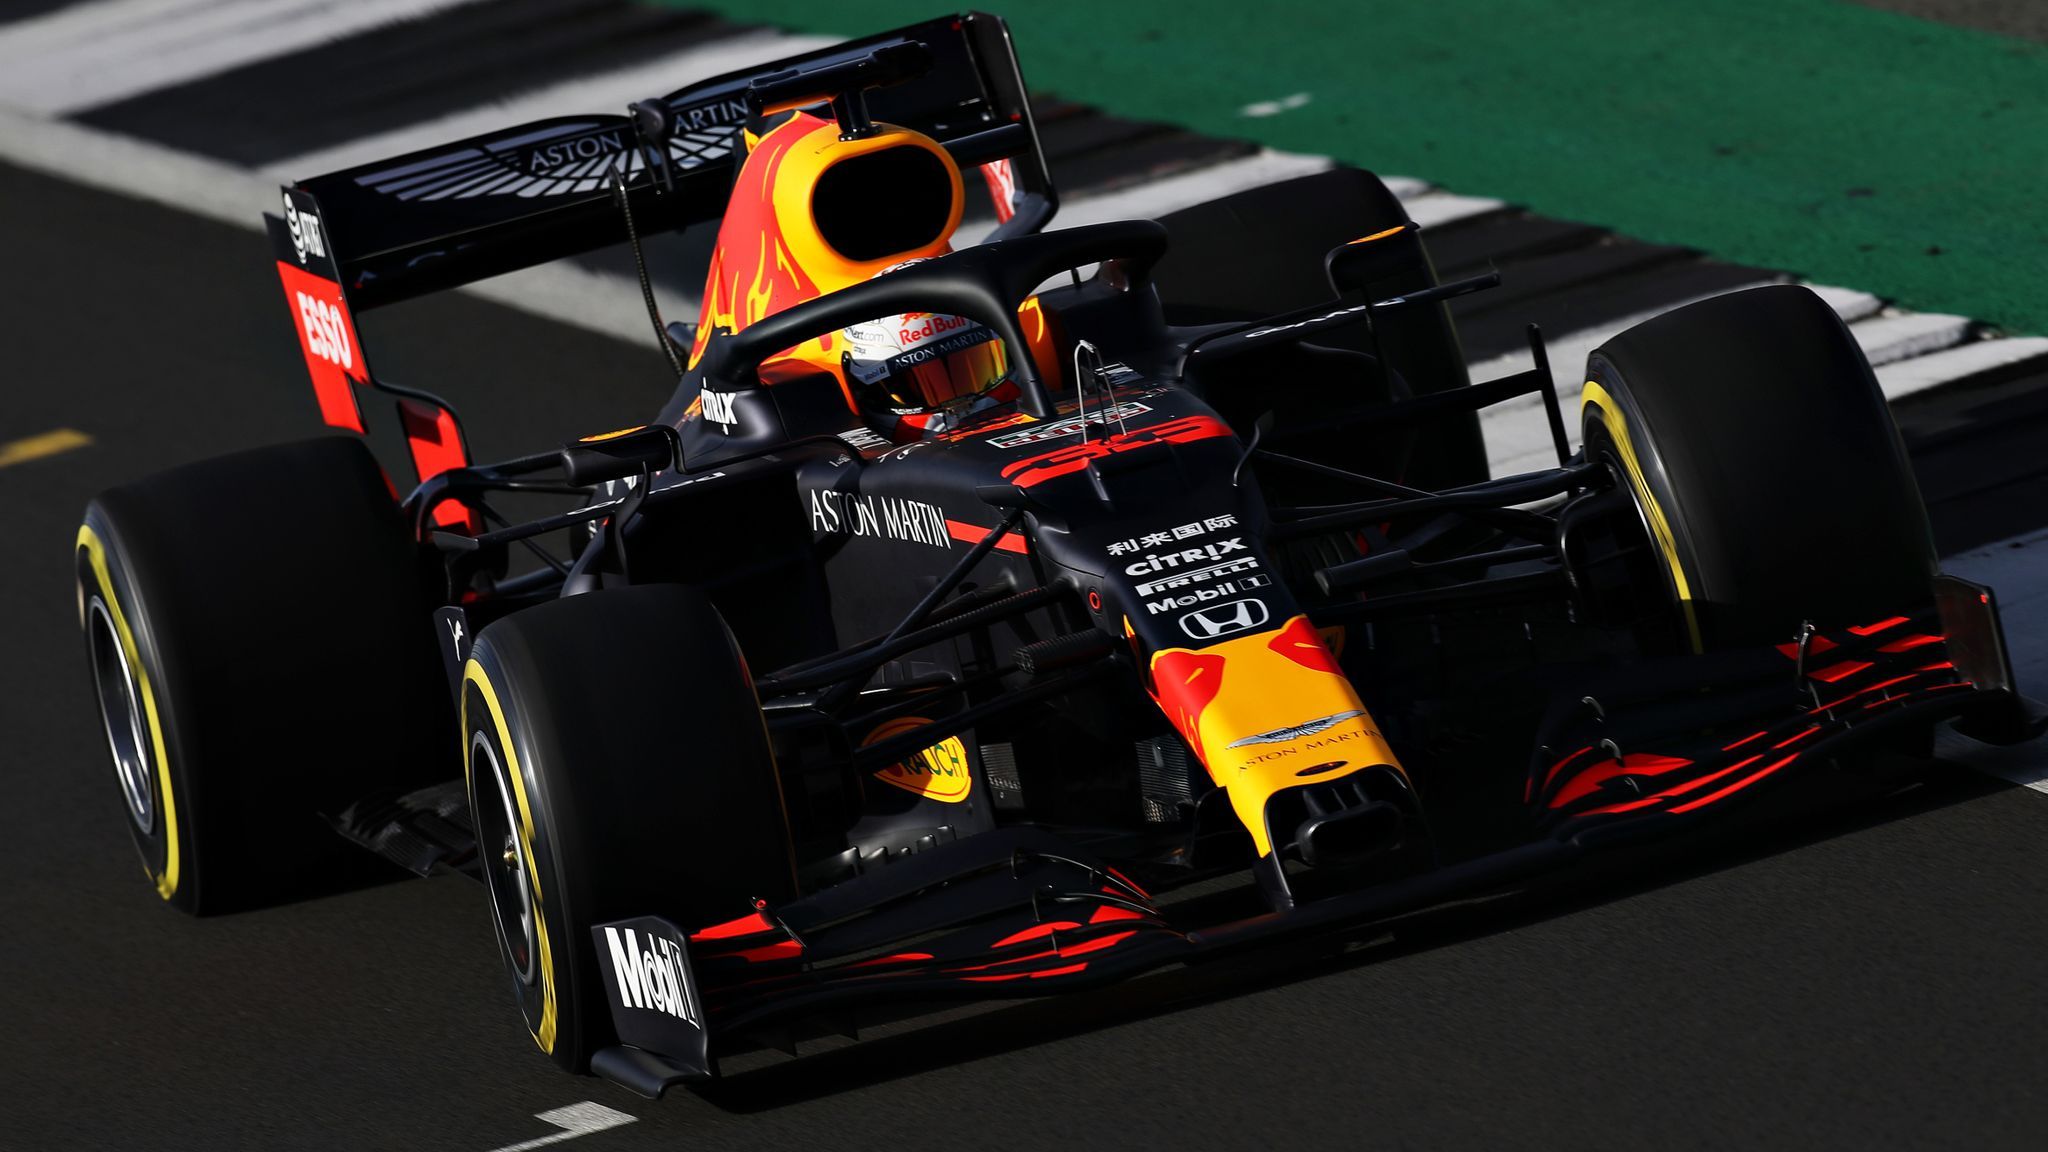 Red Bull hit the track with F1 2020 contender as RB16 is launched